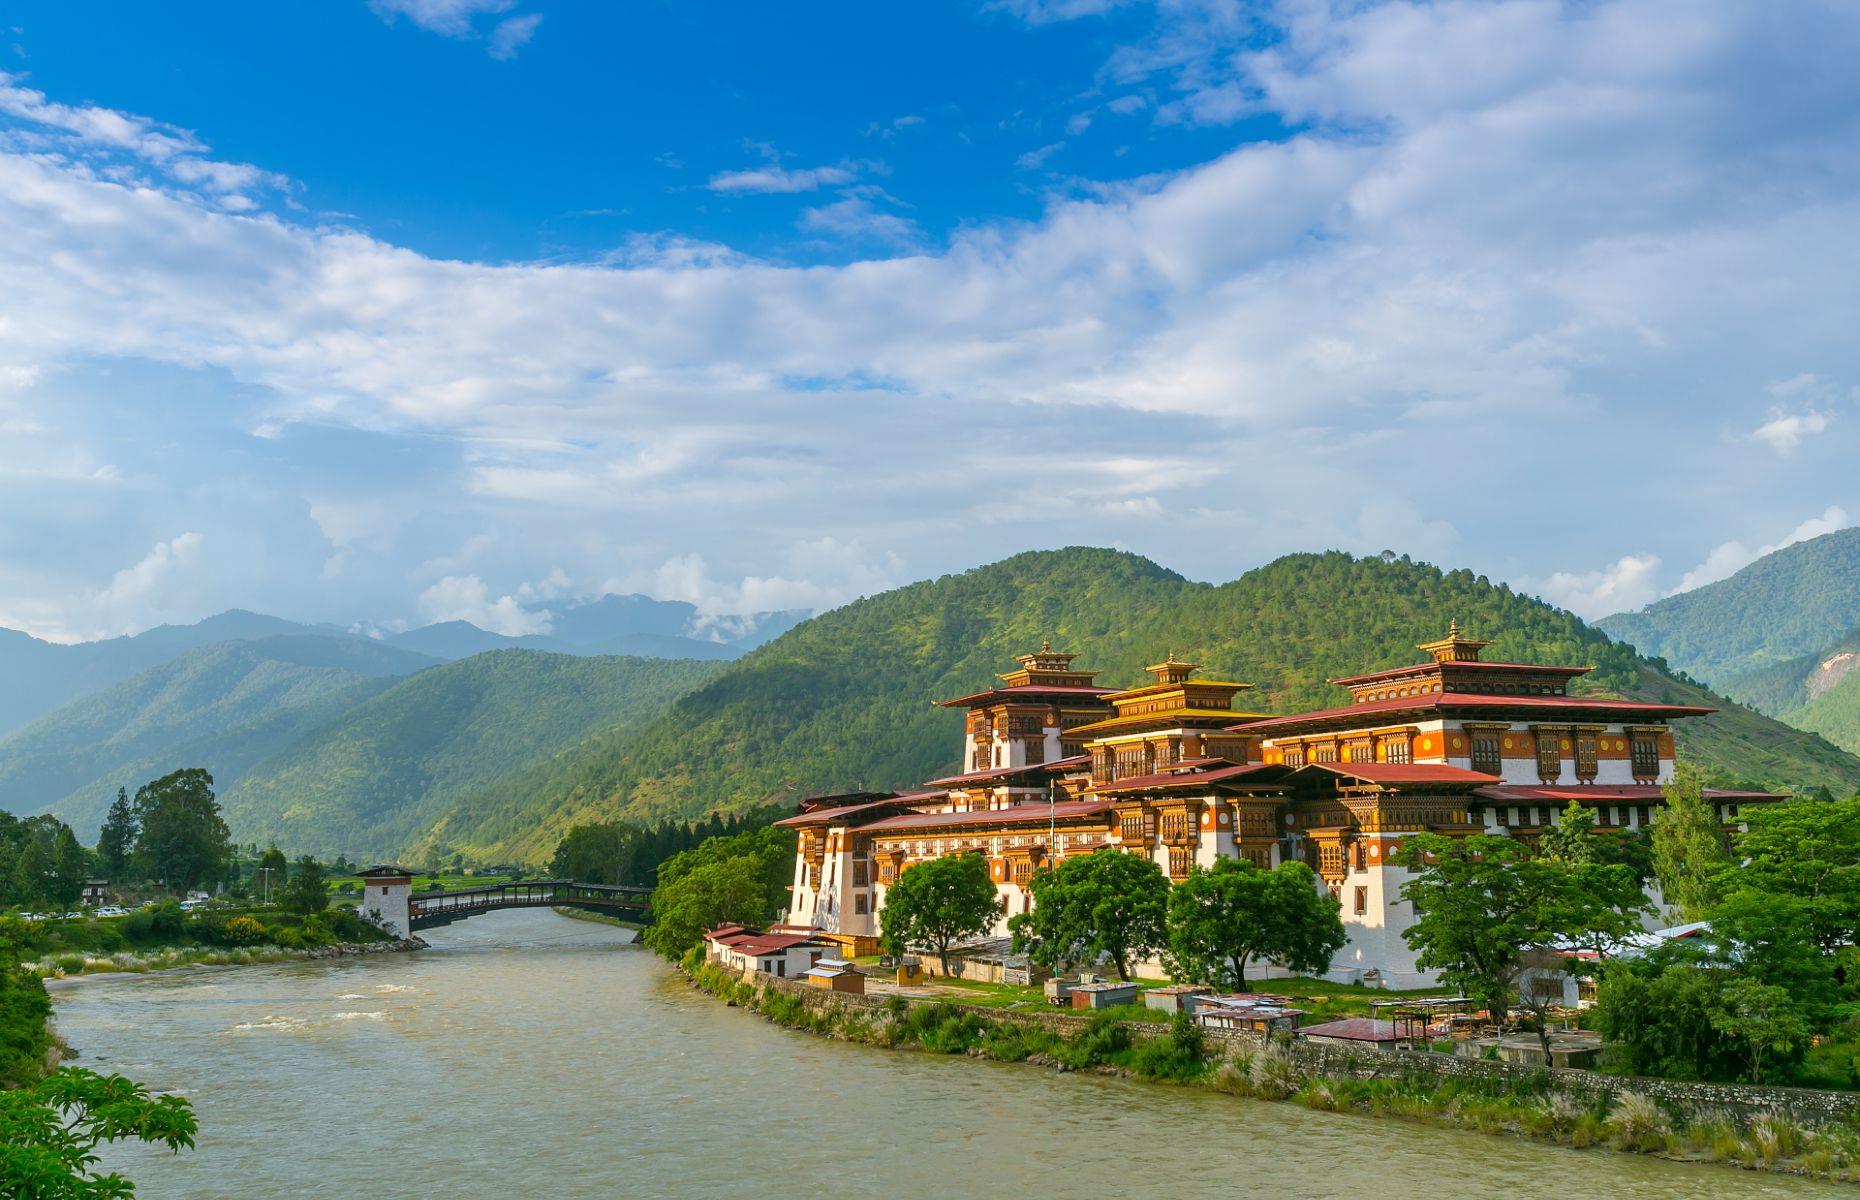 <p>A trailblazer when it comes to sustainable tourism, Bhutan has taken a slightly different approach to keeping visitor numbers at bay. As part of a new strategy, the nation, which reopened its borders in September 2022, will ask each traveler to pay a higher sustainable development fee of $200 a night – up from $65 a night in recent years. This will be put towards various development projects, including tree planting, the maintenance of footpaths and training tourism industry workers, as well as education and healthcare in the country. Bhutan is one of the few nations on Earth that is carbon negative, meaning it offsets more emissions than it produces.</p>